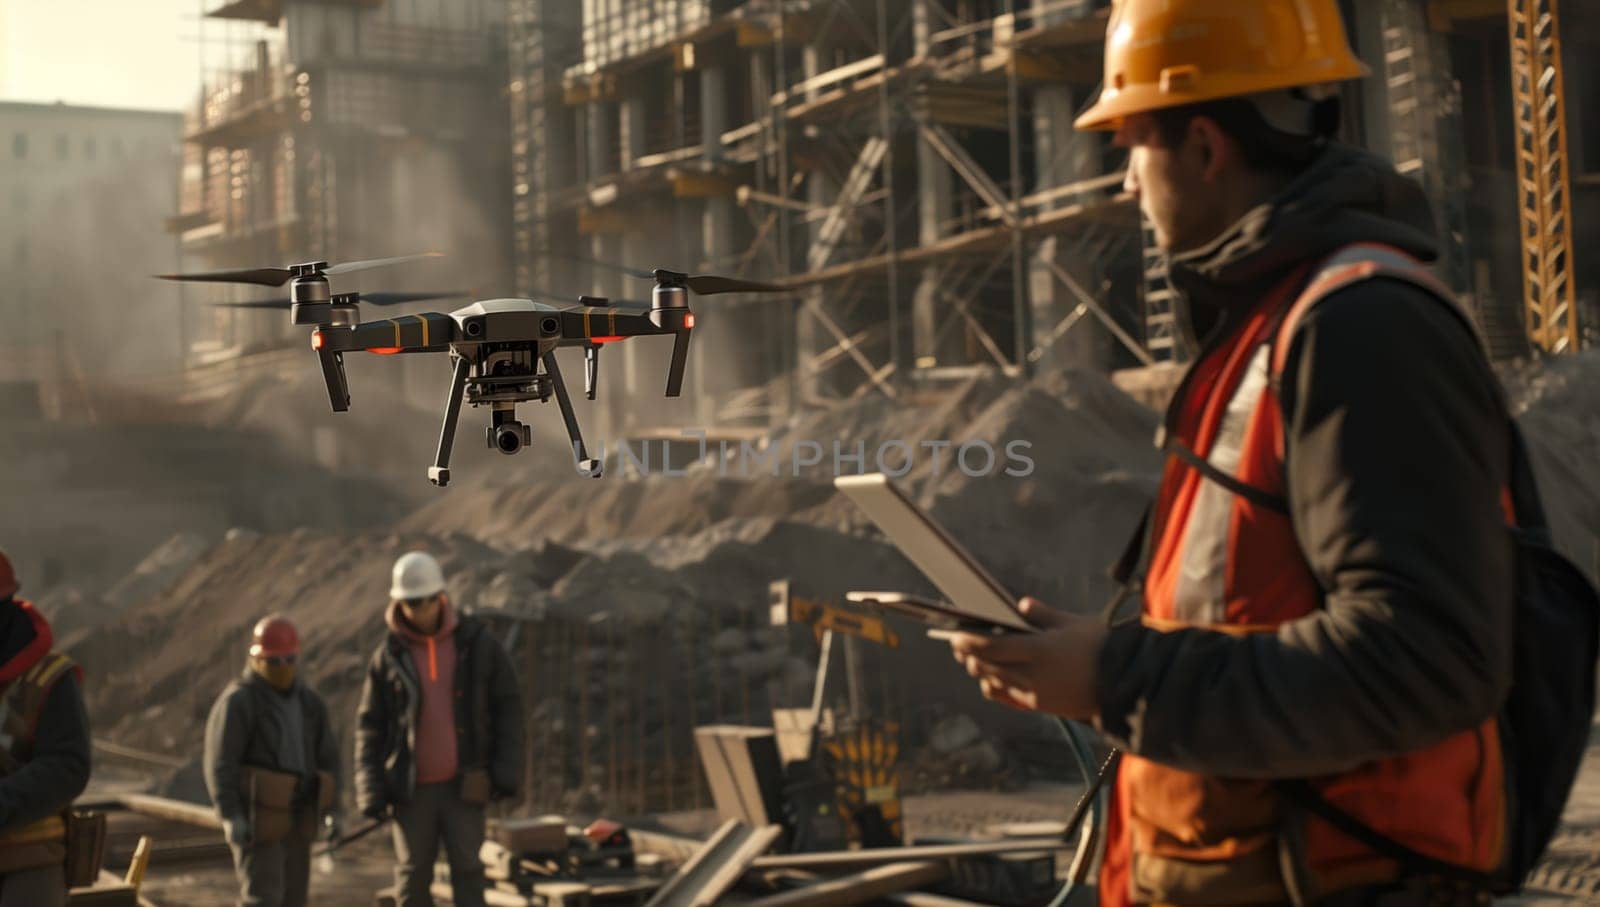 An engineer is utilizing a drone at a construction site while wearing personal protective equipment such as a hard hat and workwear made of composite materials